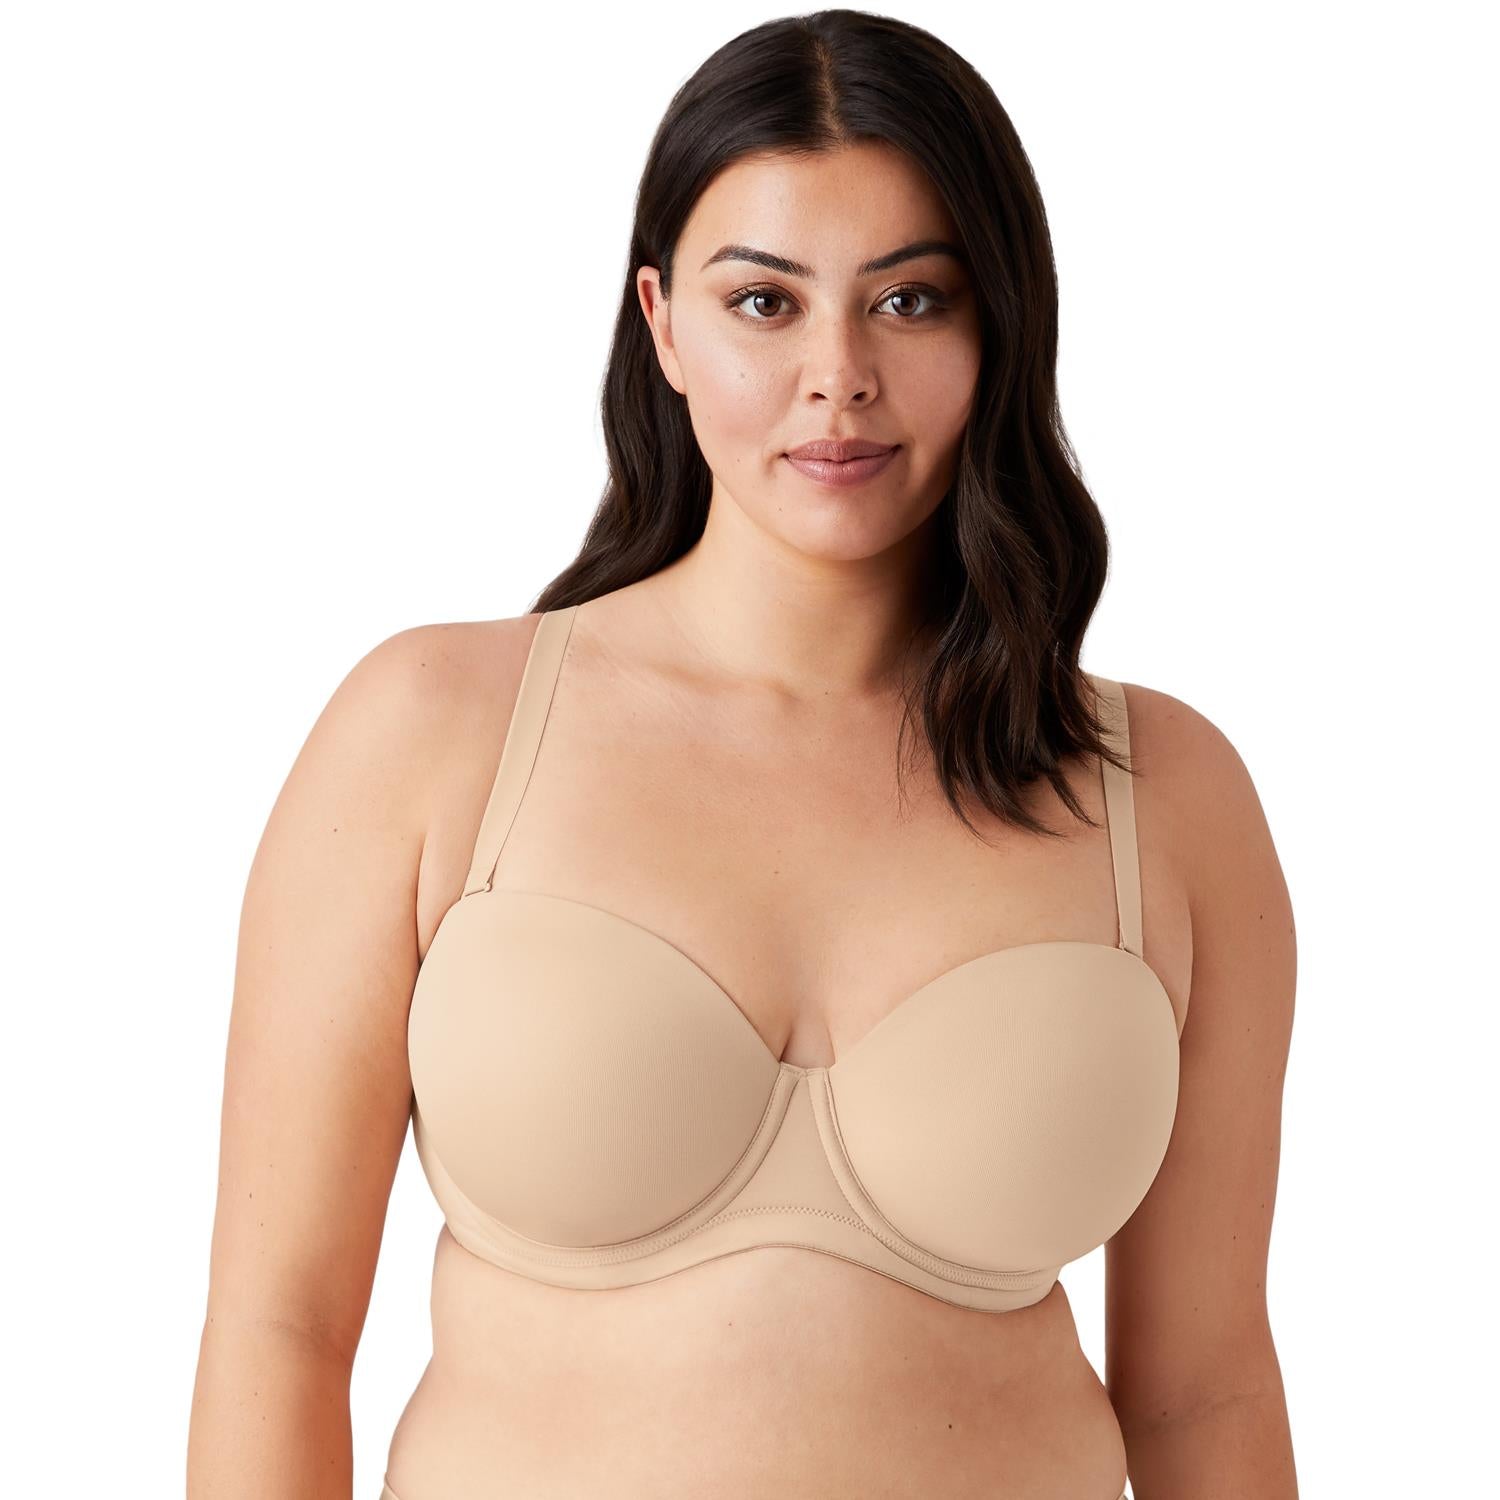 Vicanie's The Bra Fitting Specialists - Minimalist, yet effective, the Clara  bra from Anita features an attractive, wire free design. Adjustable, wide  comfort straps guarantee firm support and the seamless, pre-shaped cups